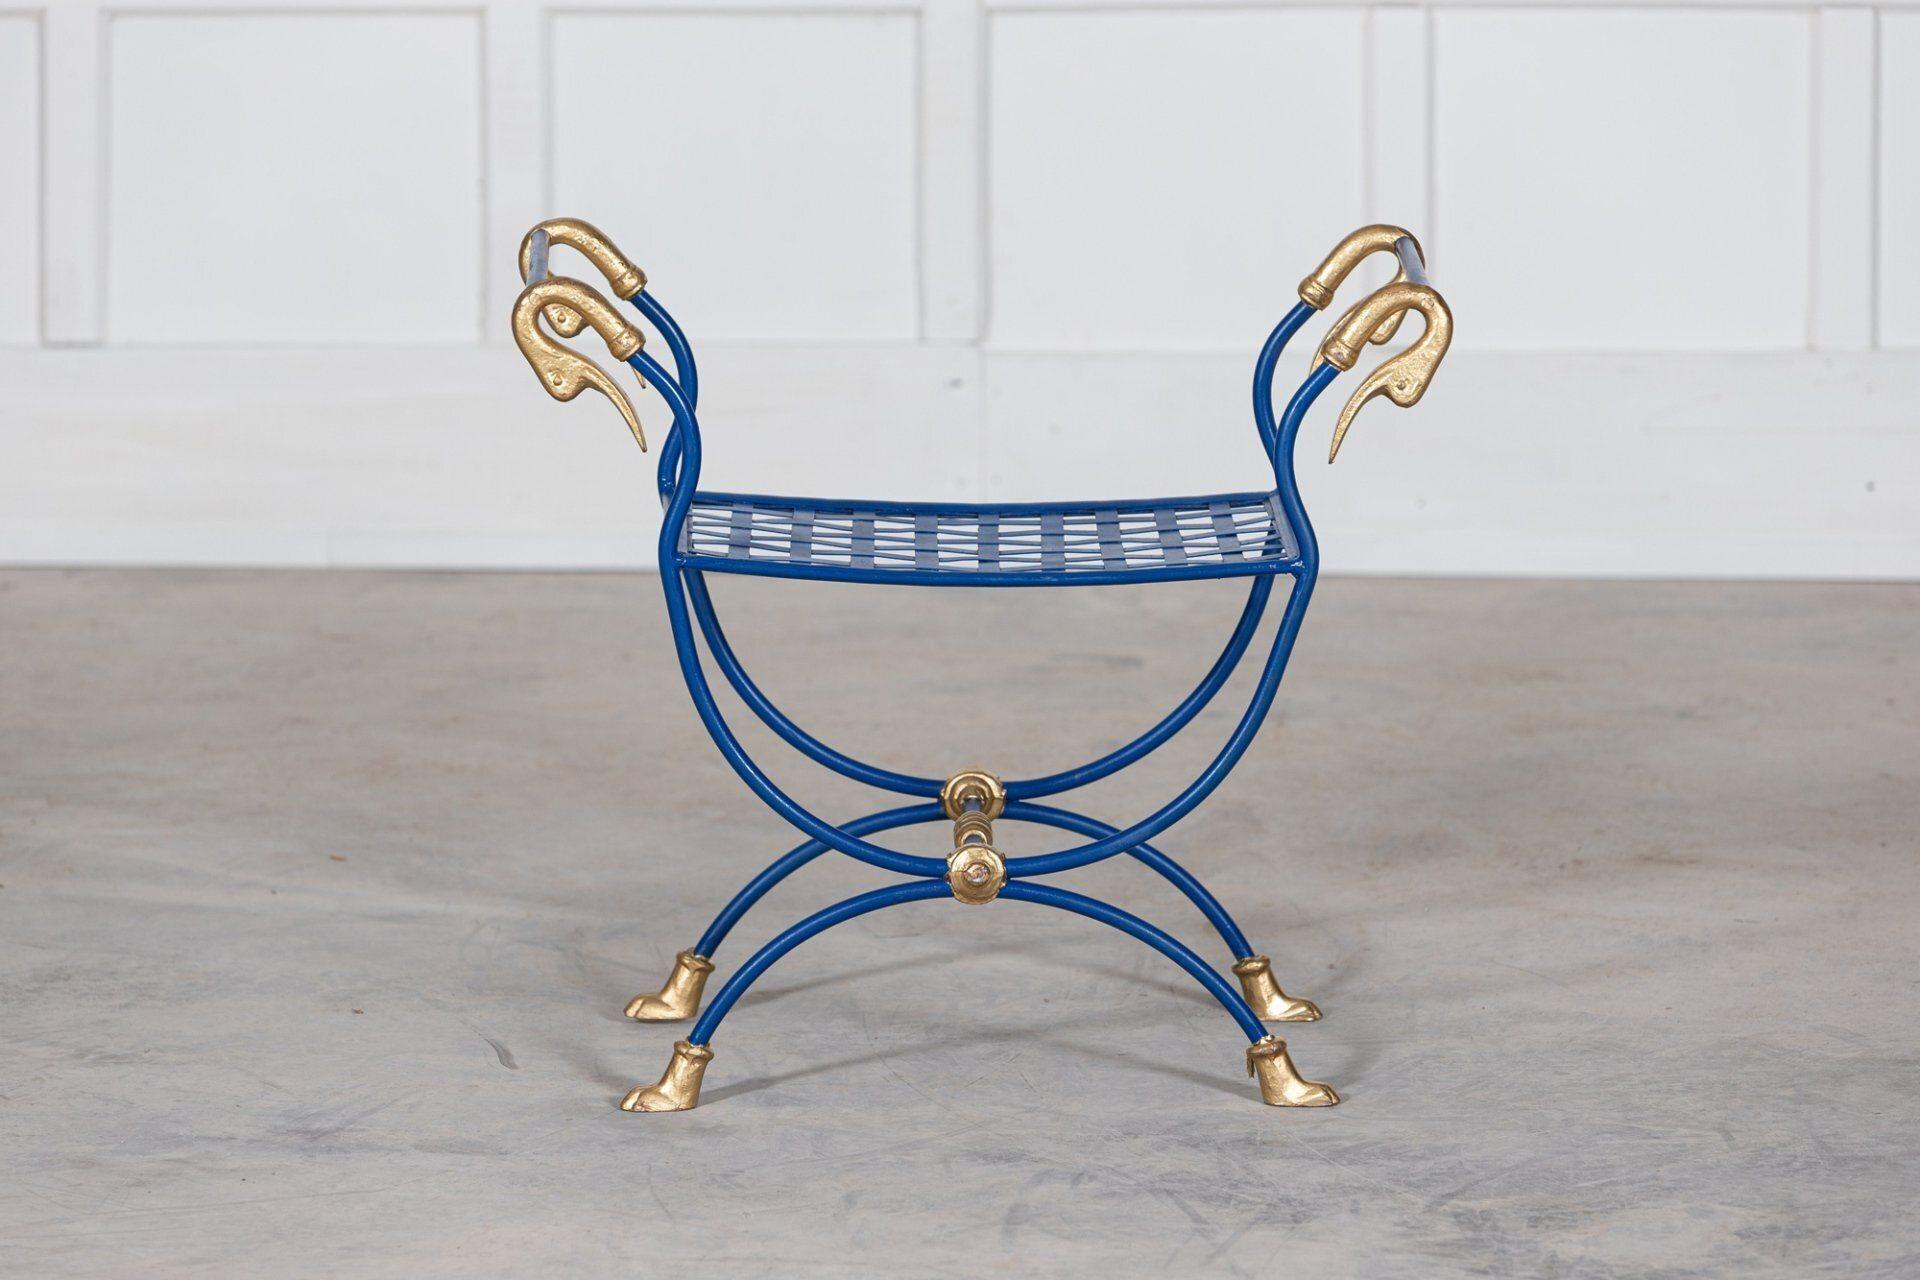 Circa 1950
Maison Jansen Swan Stool in Empire style with paw feet
Measures: W 66 x D 31 x H 58cm.
   